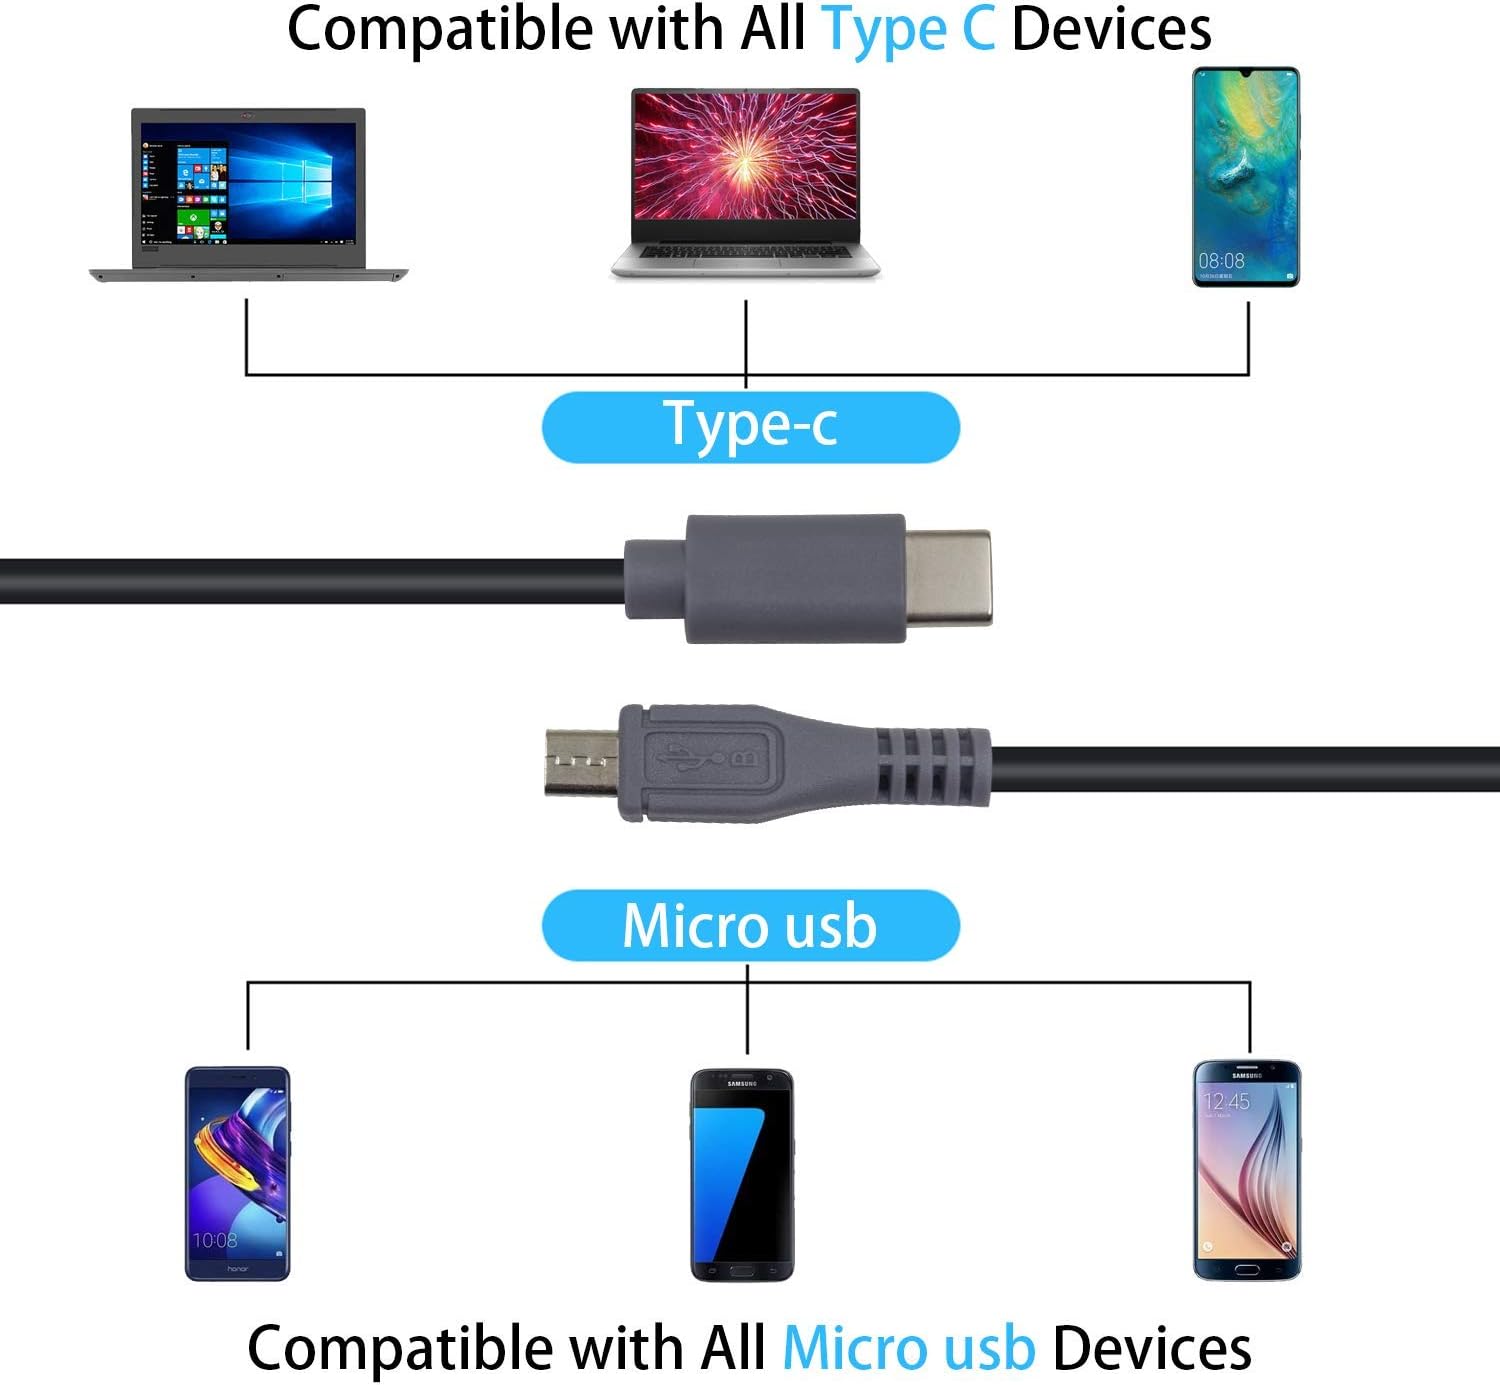 Micro USB 5 Pin Male to USB C Male Data Convertor OTG Cable